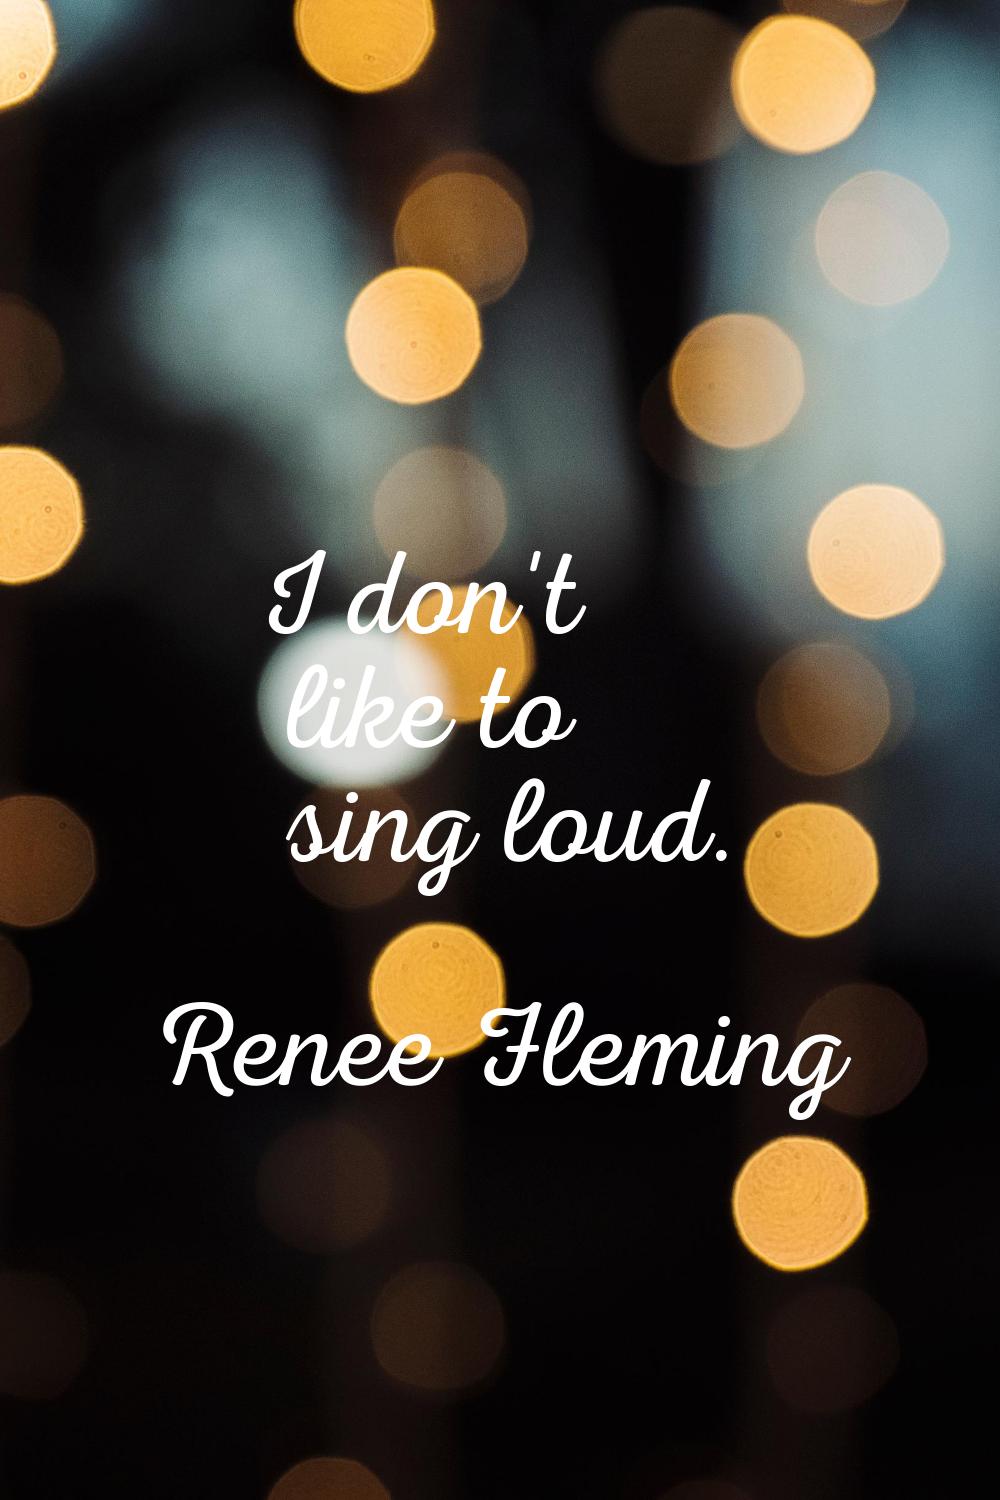 I don't like to sing loud.